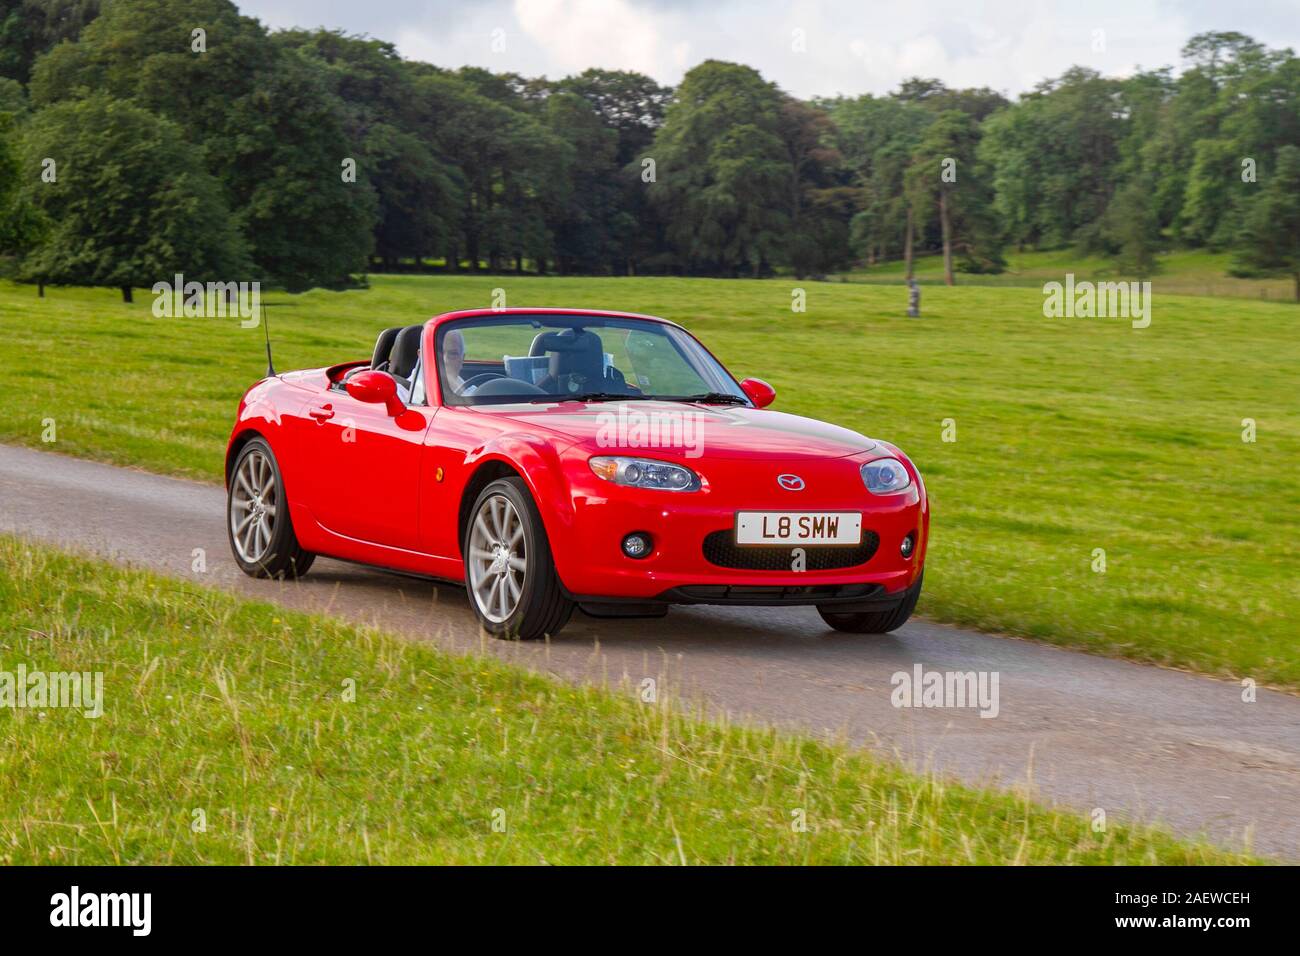 2007 red Mazda Mx5 sport; Classic cars, historics, cherished, old timers, collectable restored vintage veteran, vehicles of yesteryear sportscars arriving for the Mark Woodward motoring event at Leighton Hall, Carnforth, UK Stock Photo